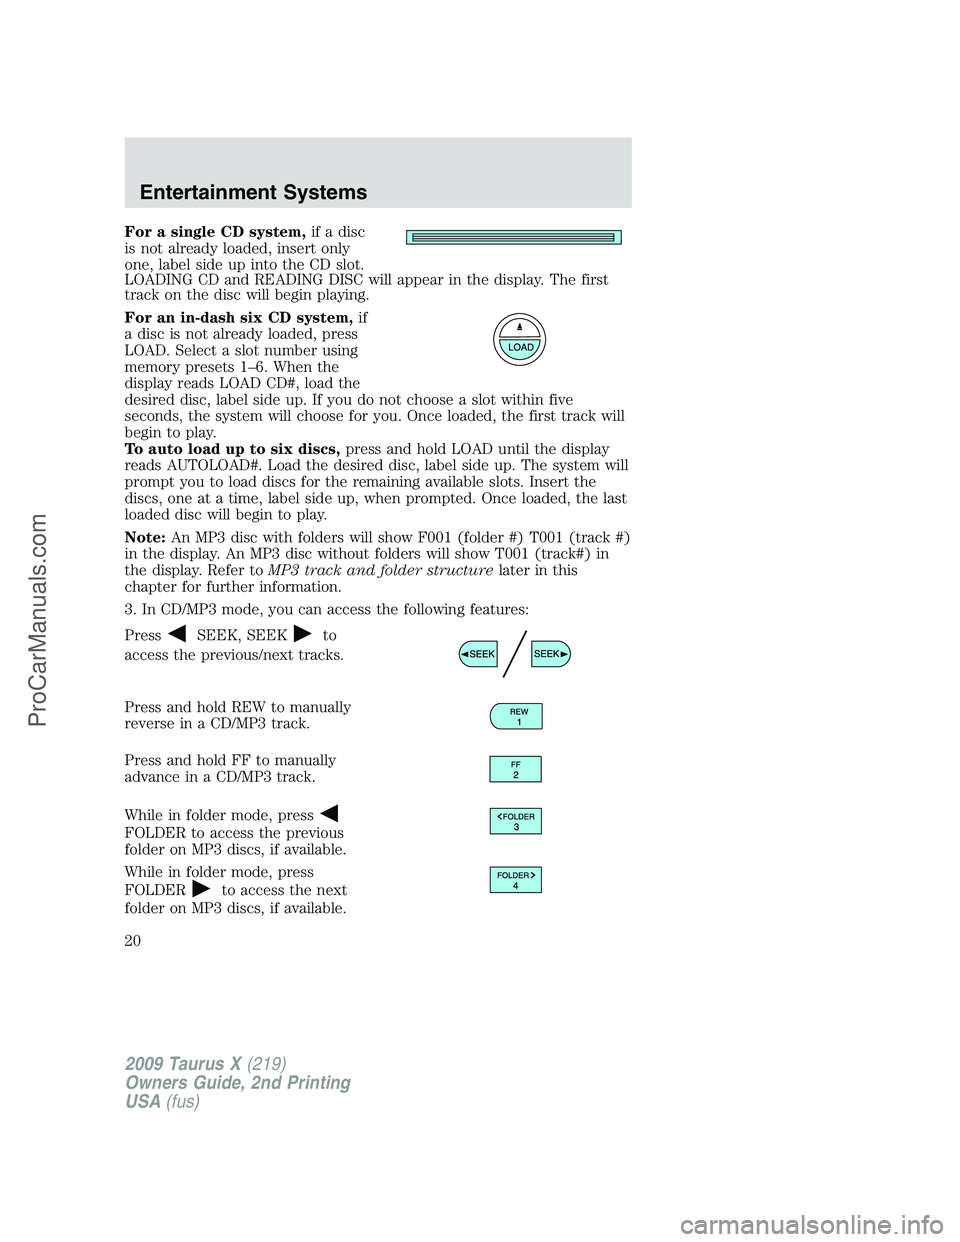 FORD FREESTYLE 2009  Owners Manual For a single CD system,if a disc
is not already loaded, insert only
one, label side up into the CD slot.
LOADING CD and READING DISC will appear in the display. The first
track on the disc will begin 